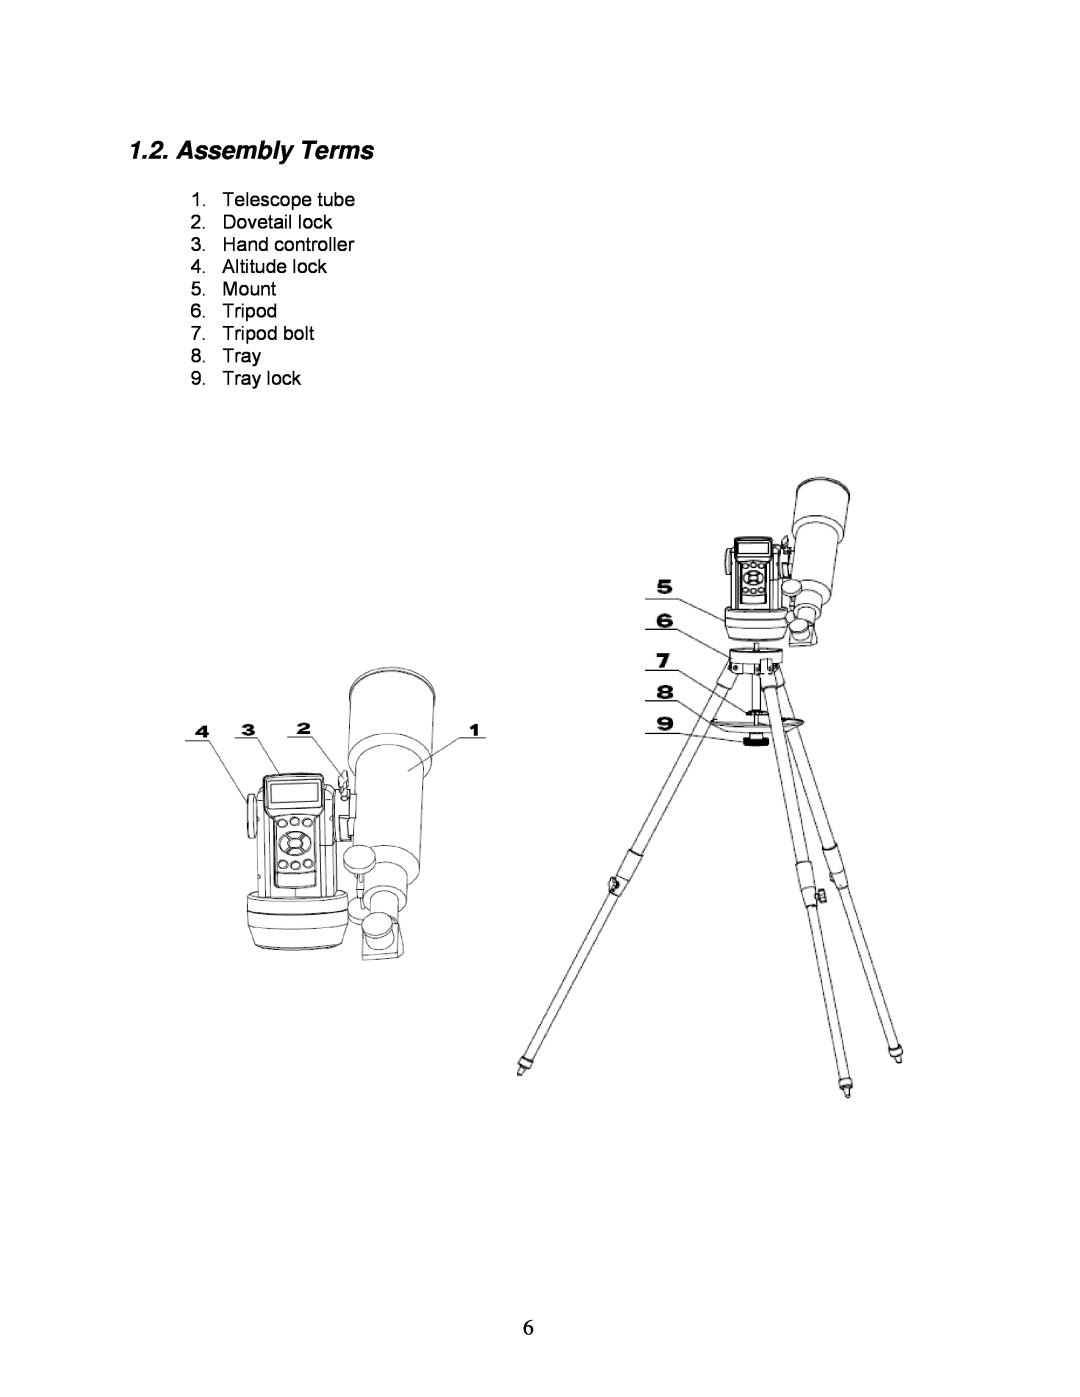 iOptron 8504, 8503, 8502, 8500, 8403 Assembly Terms, Telescope tube 2.Dovetail lock, Hand controller 4.Altitude lock 5.Mount 